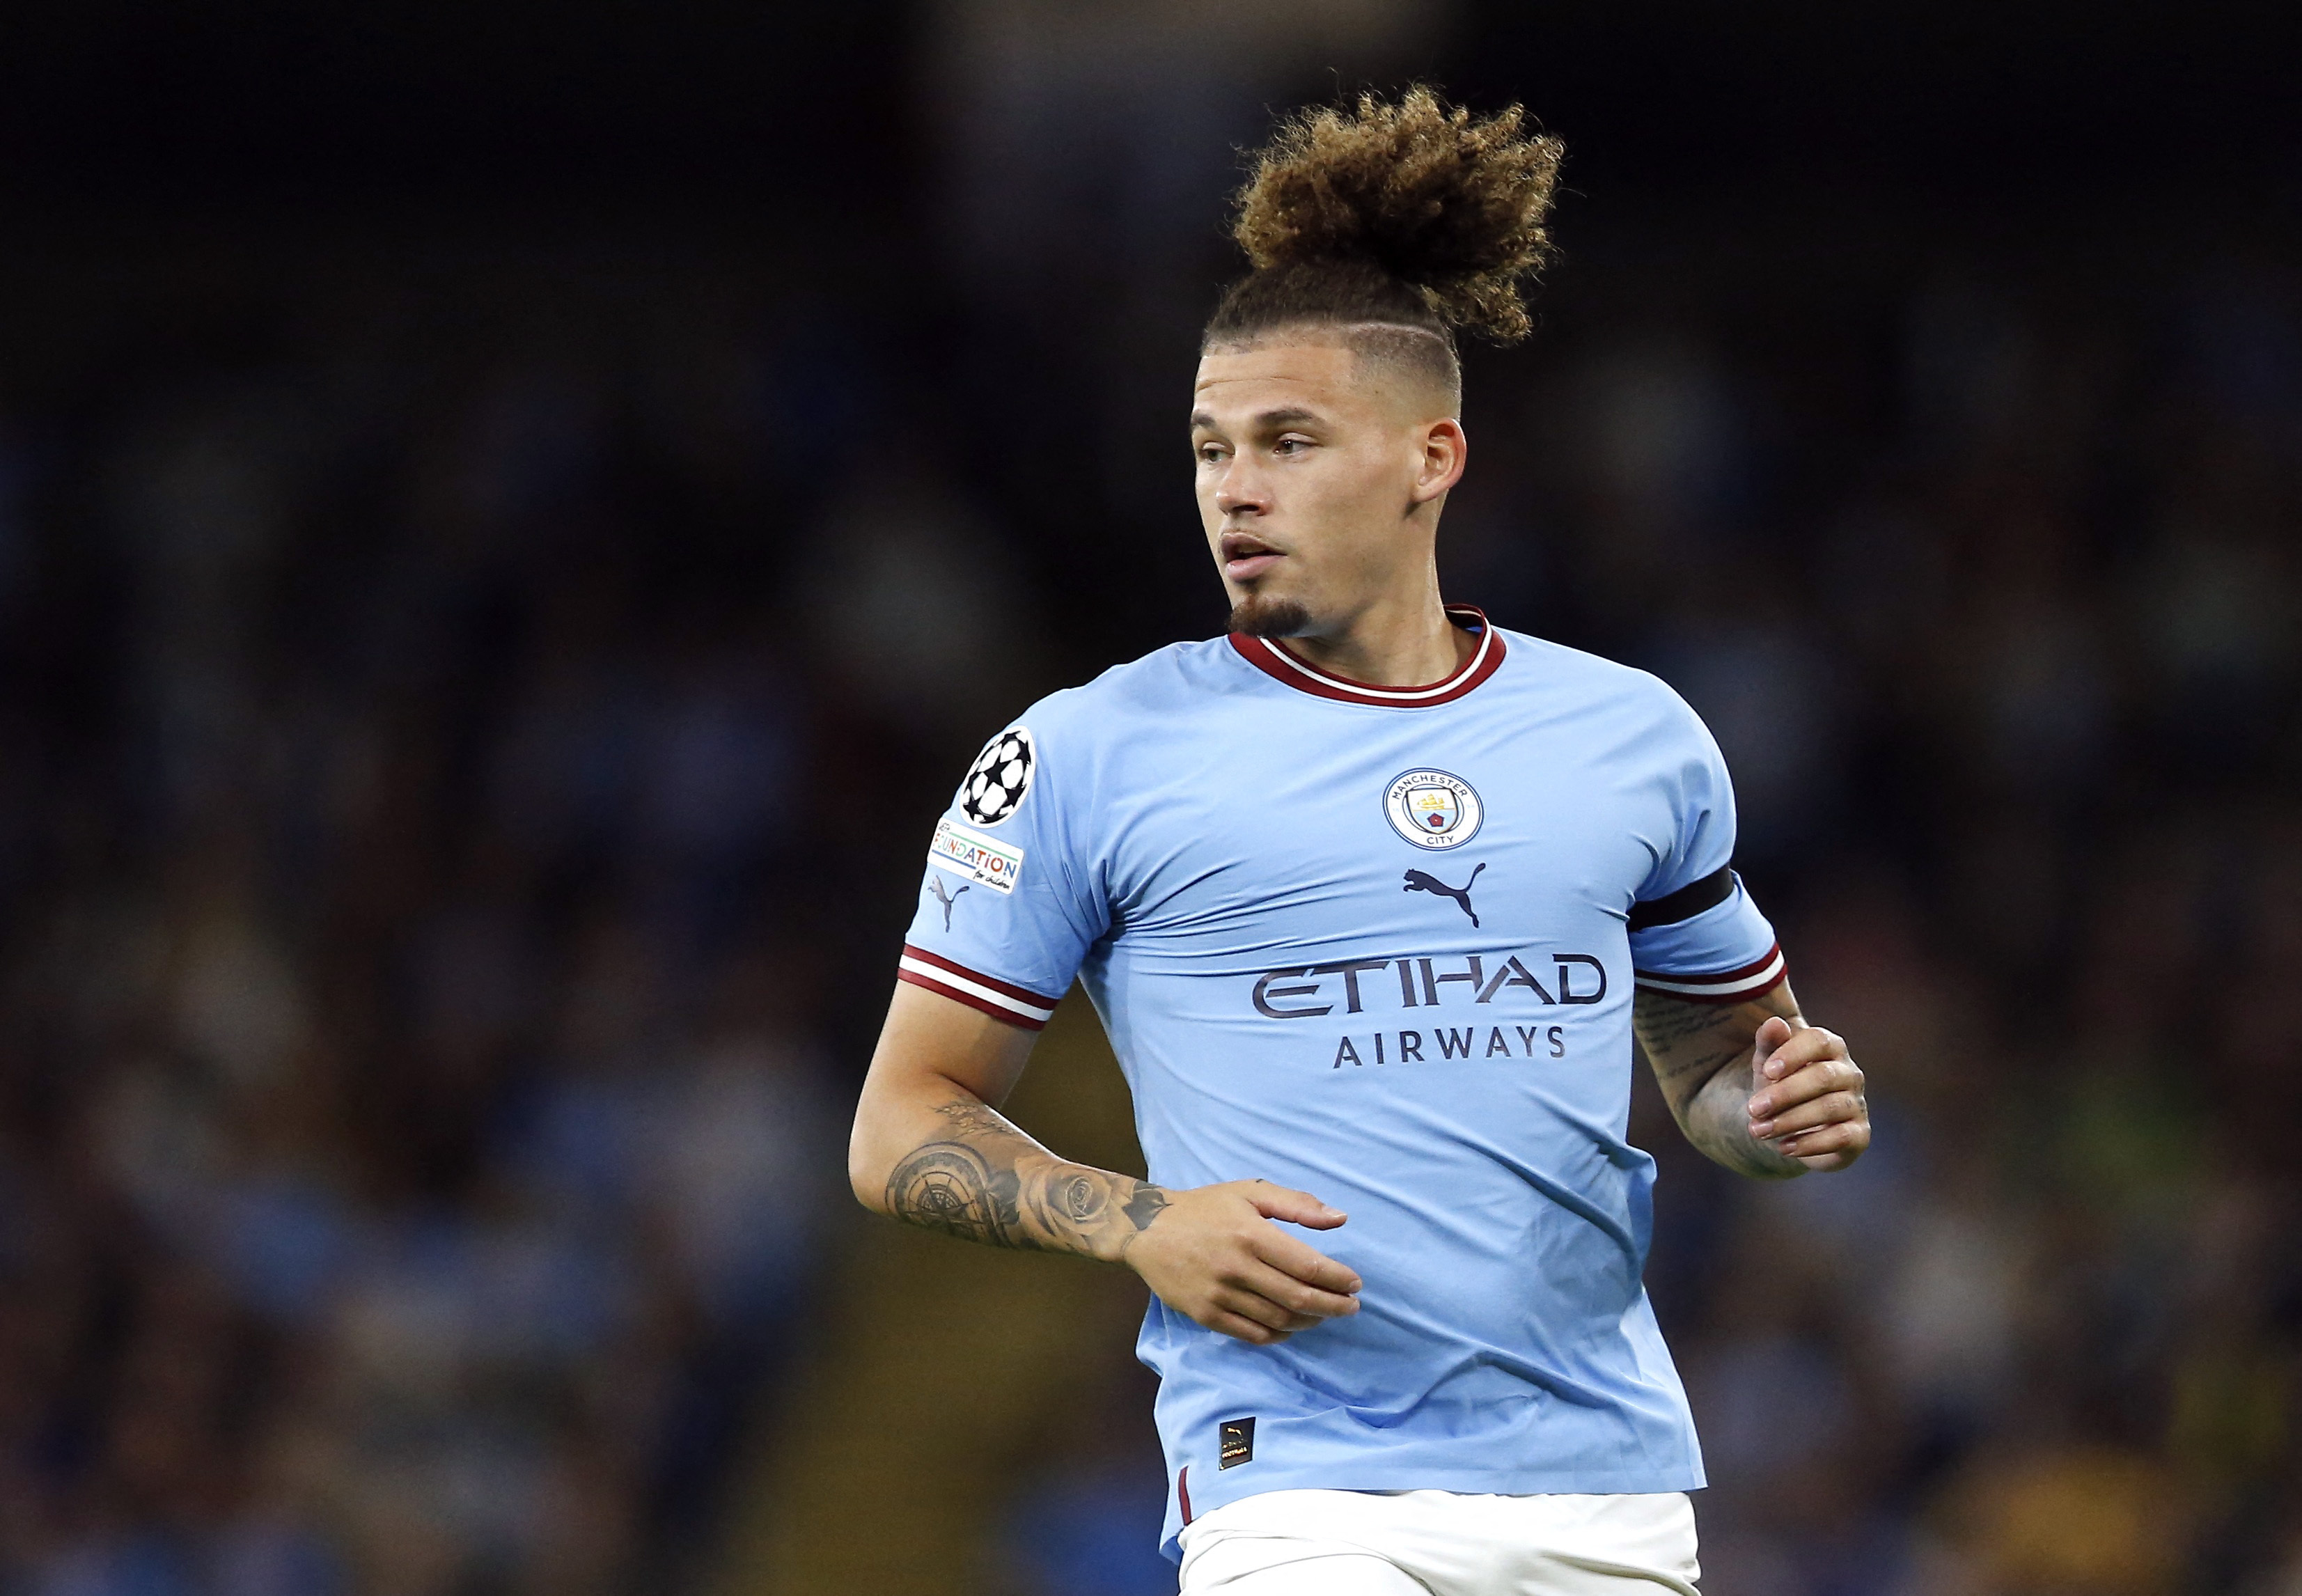 Injured Phillips could return for World Cup but may need surgery: Guardiola